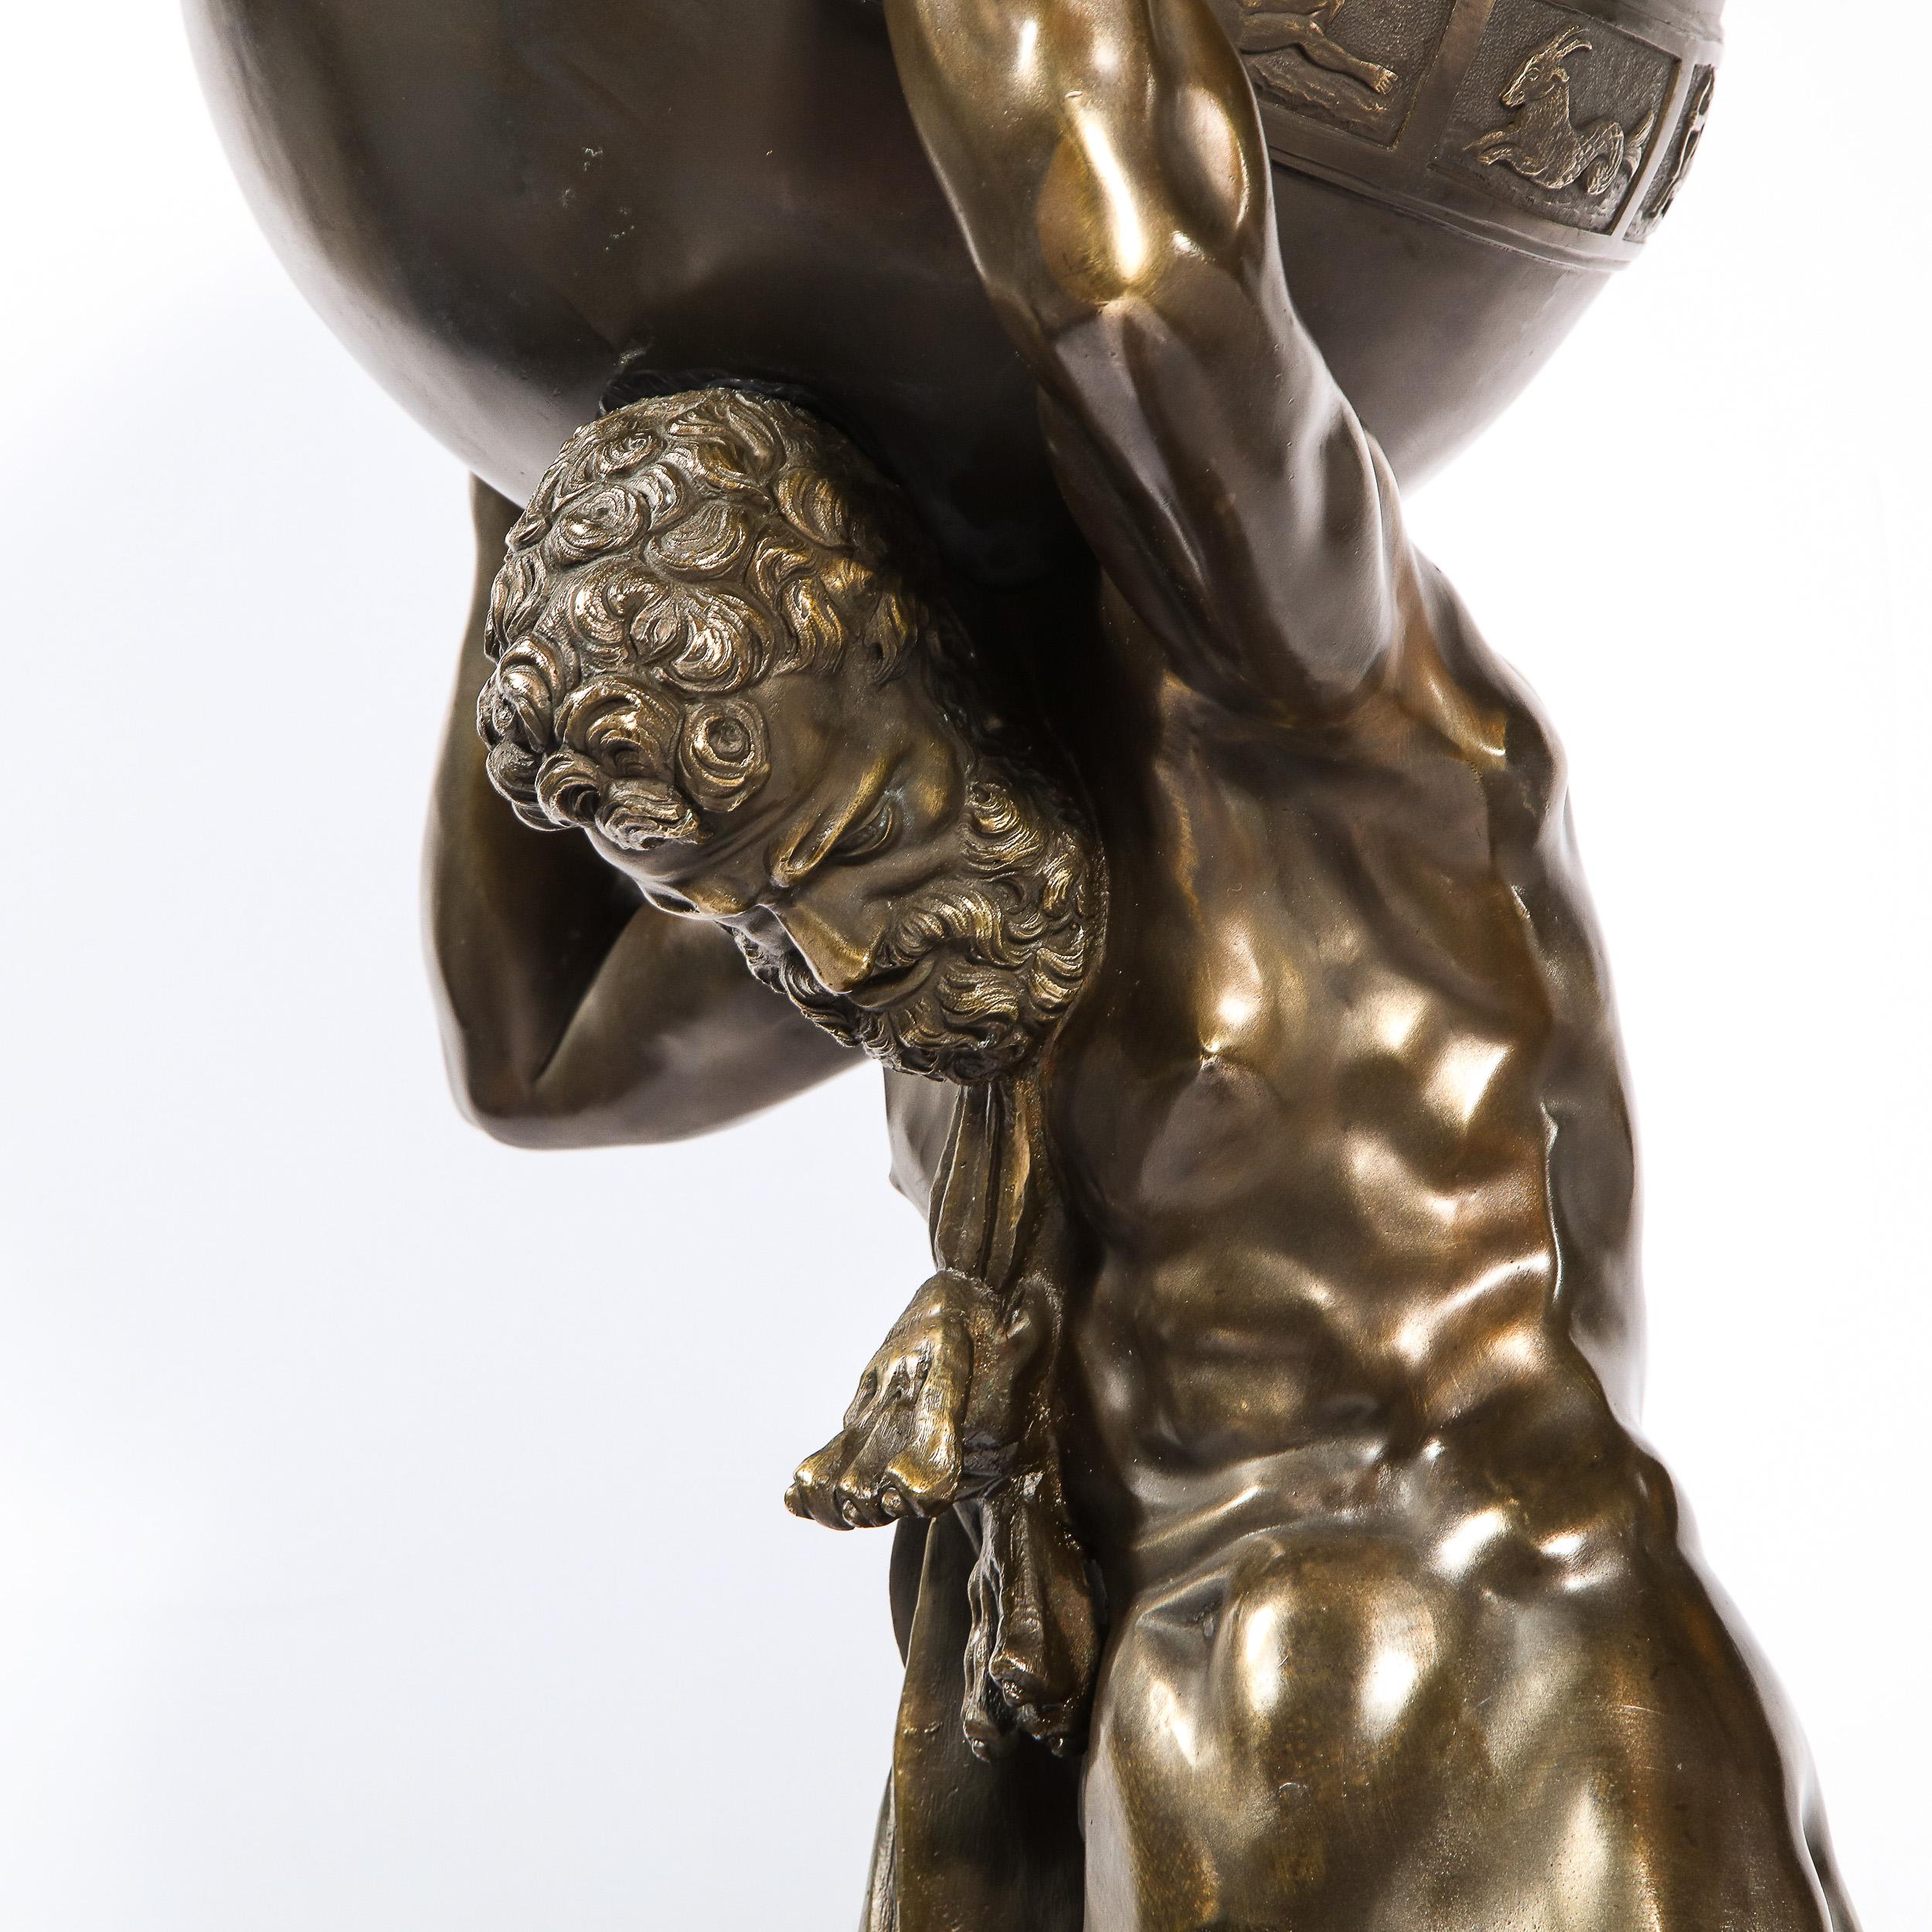 Midcentury Bronze Sculpture of Atlas Holding Globe Banded with Zodiac Symbols 9